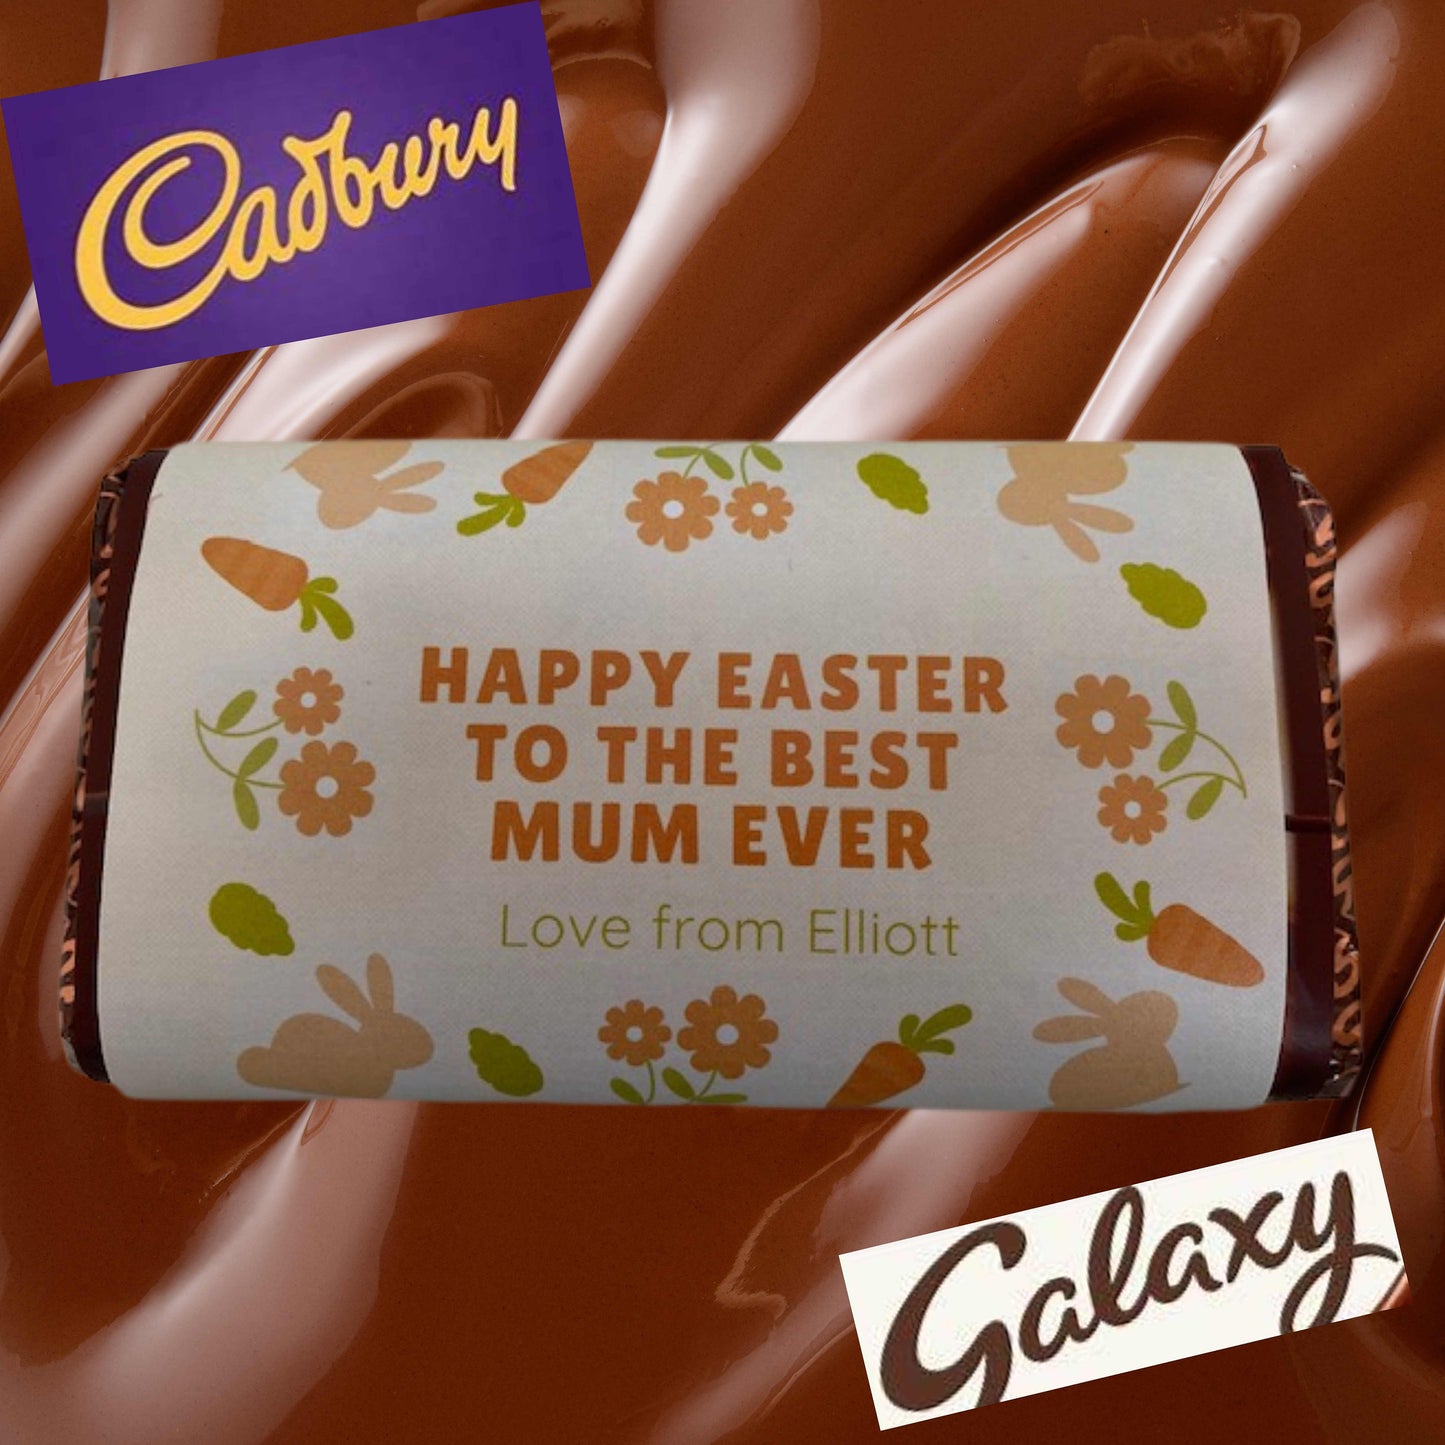 Happy Easter to the best mum ever personalised wrapped Chocolate Bar choose from Galaxy or Cadburys